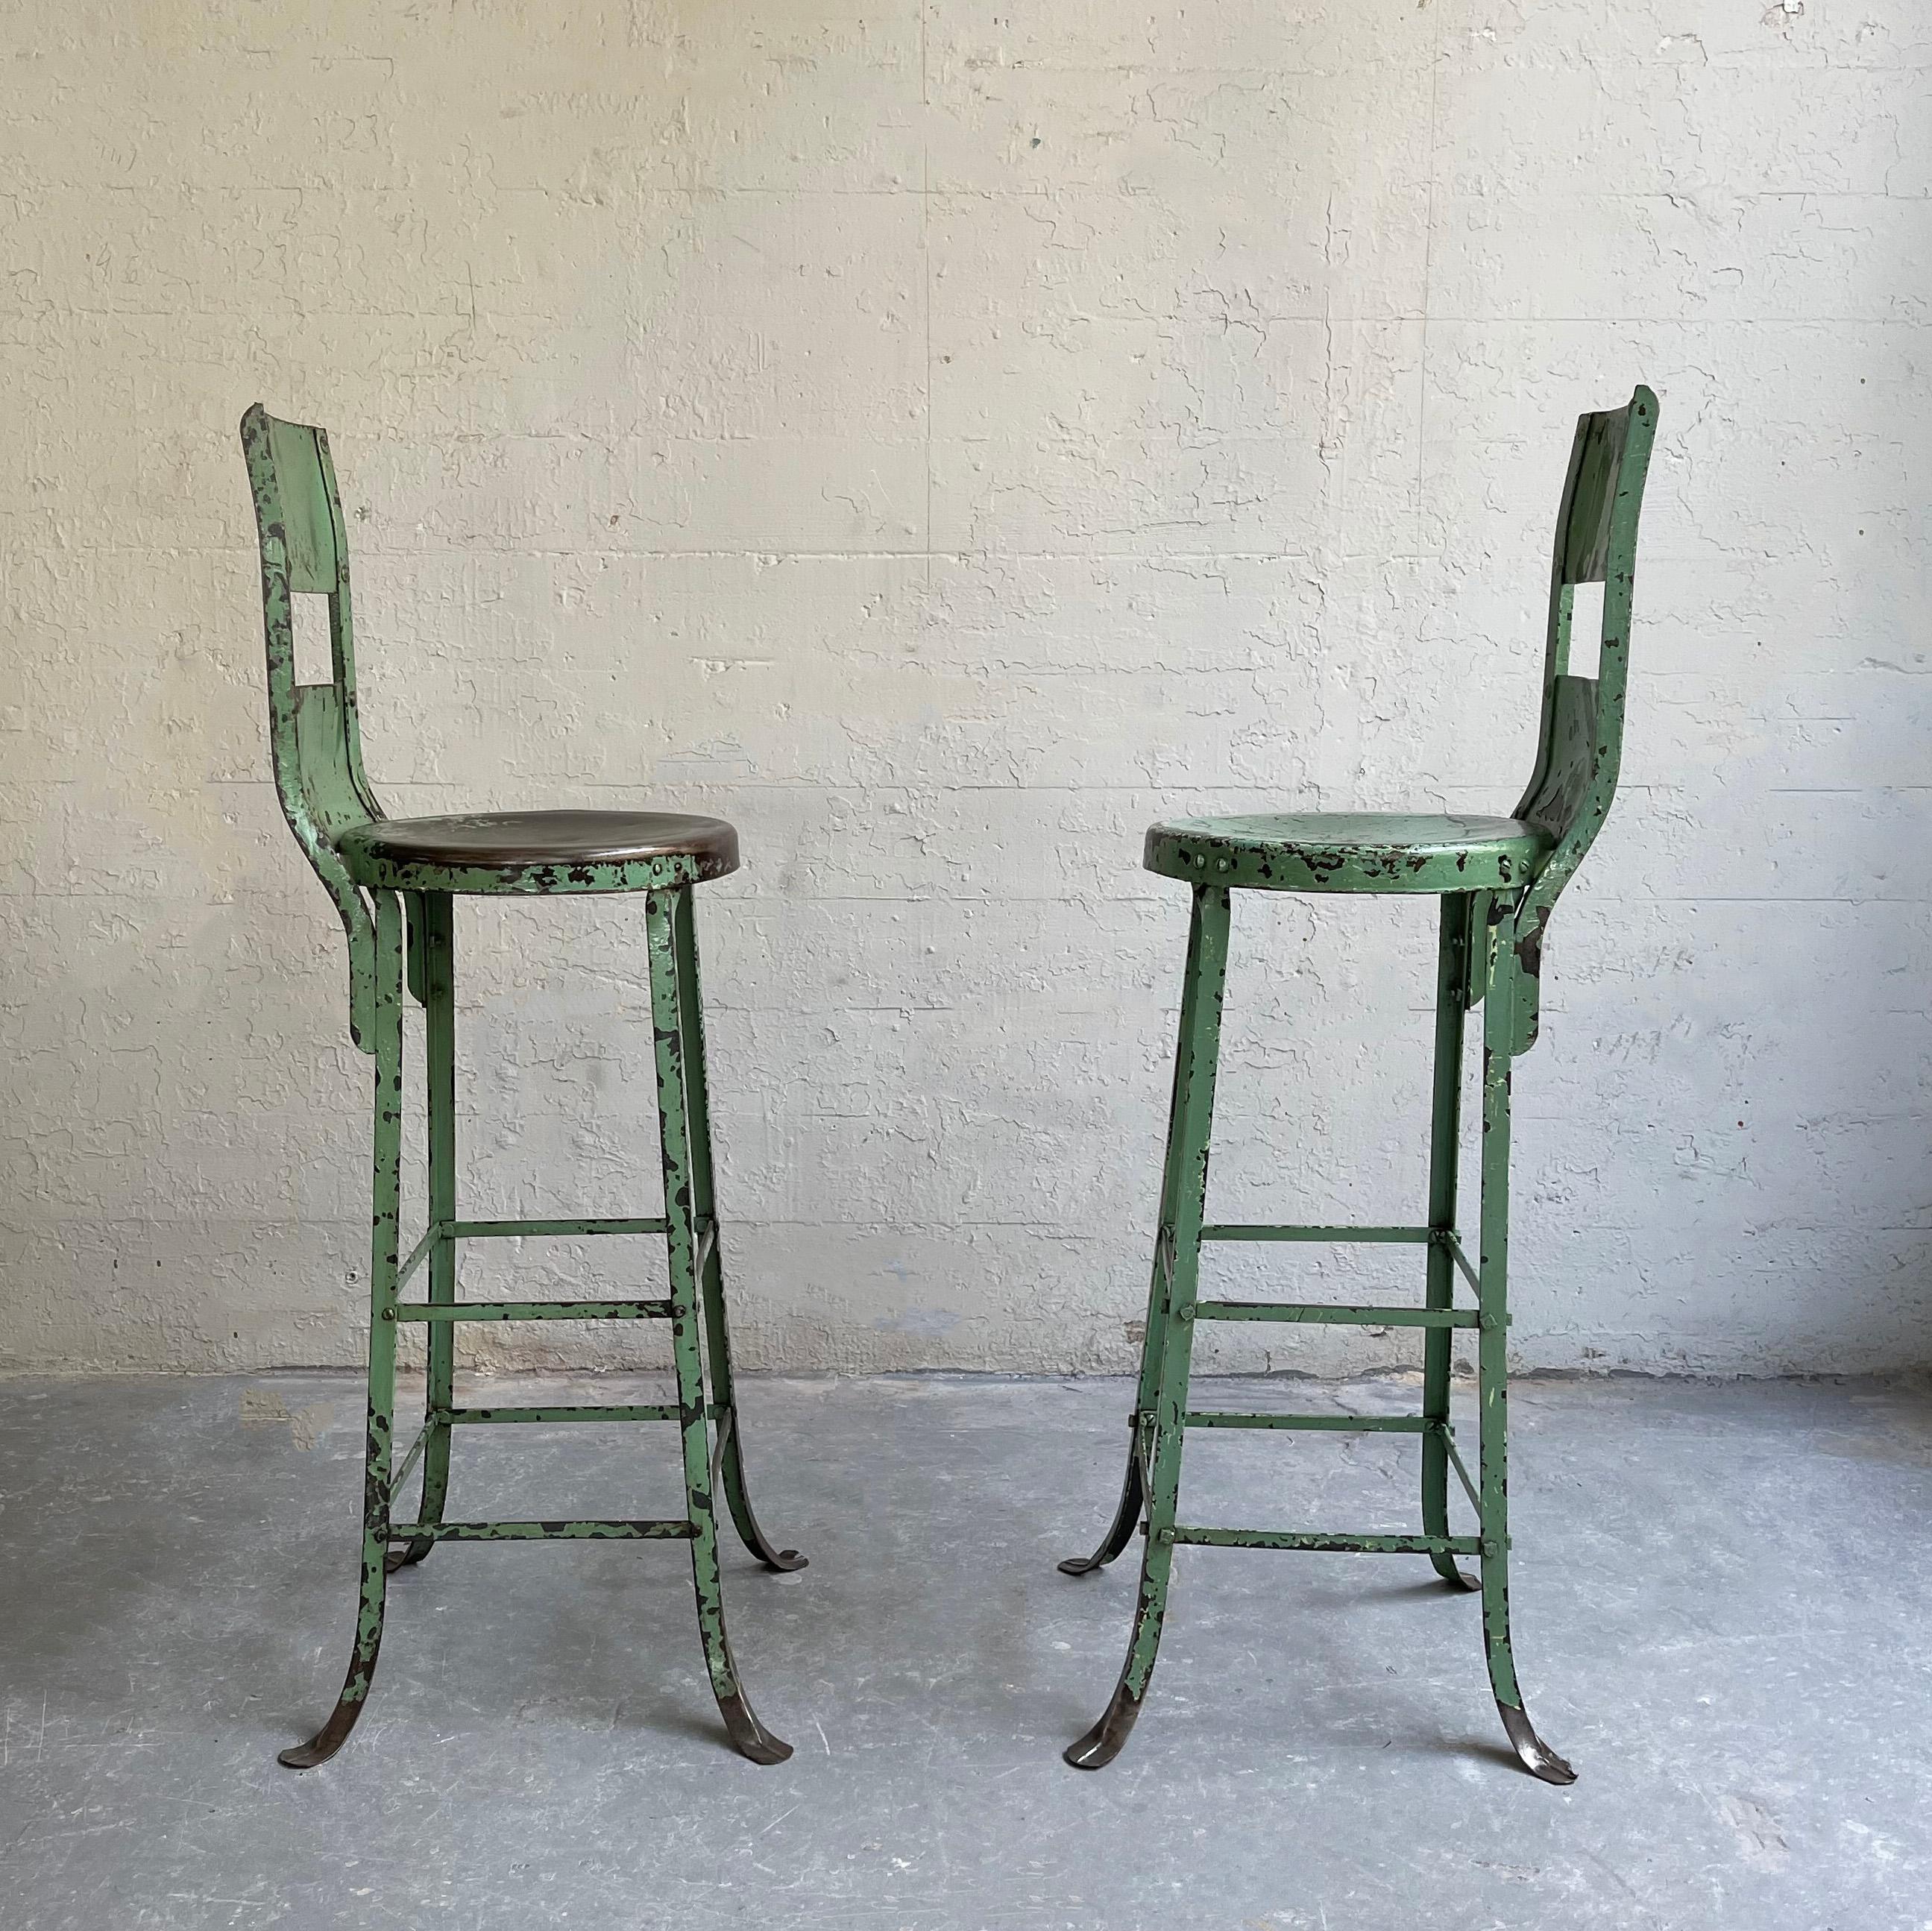 Tall Industrial Painted Steel Shop Stools In Good Condition For Sale In Brooklyn, NY